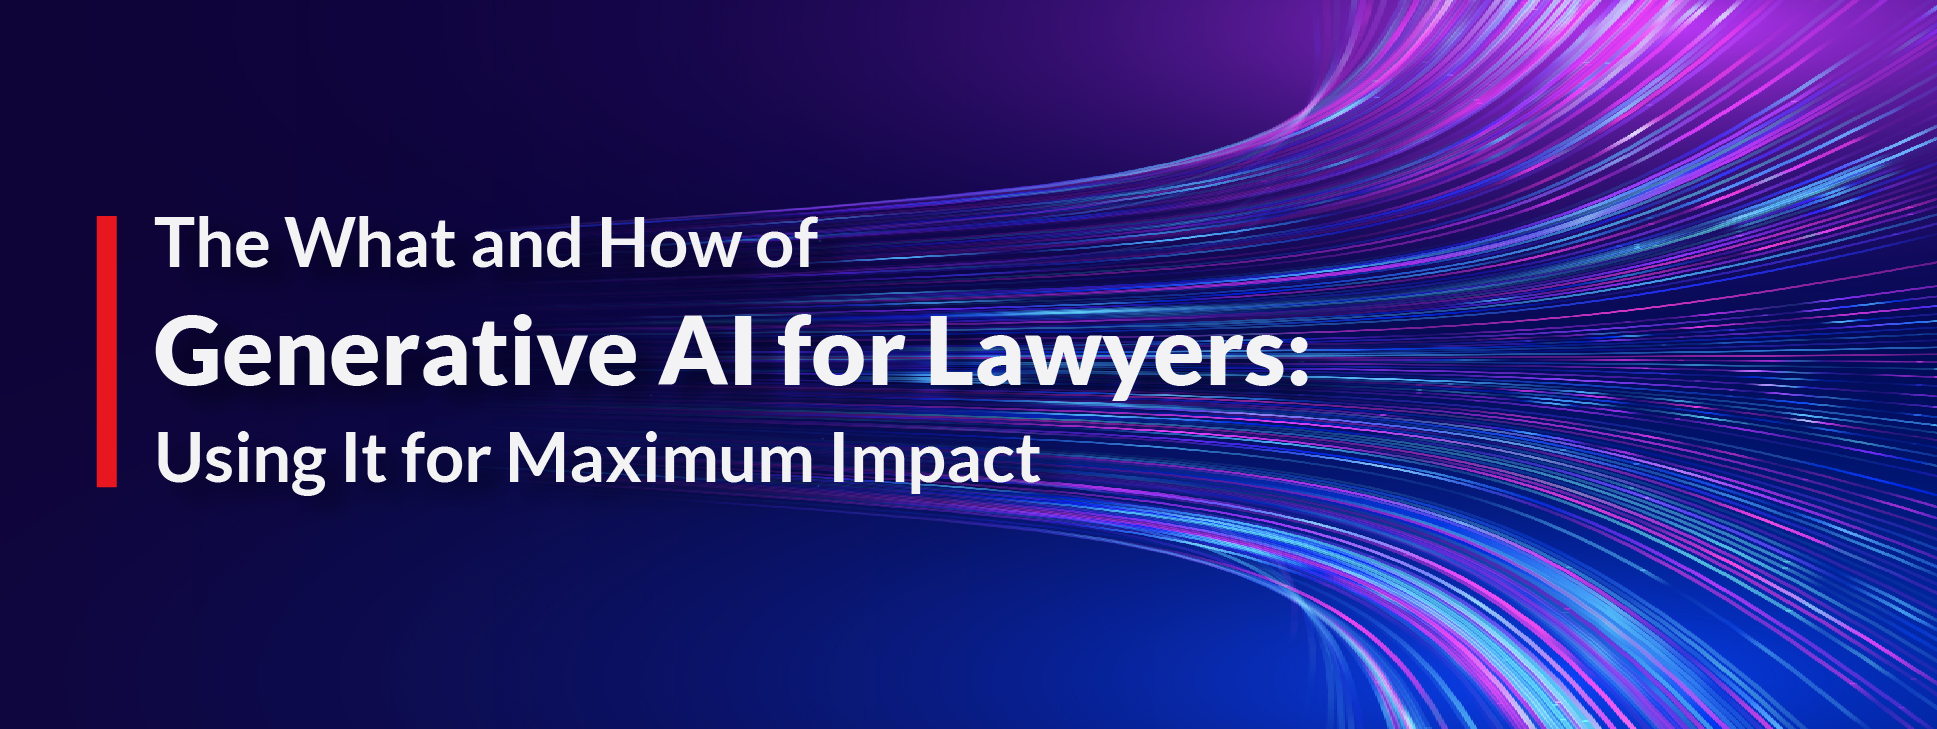 Generative AI for Lawyers: What It Is, How It Works, and Using It for Maximum Impact